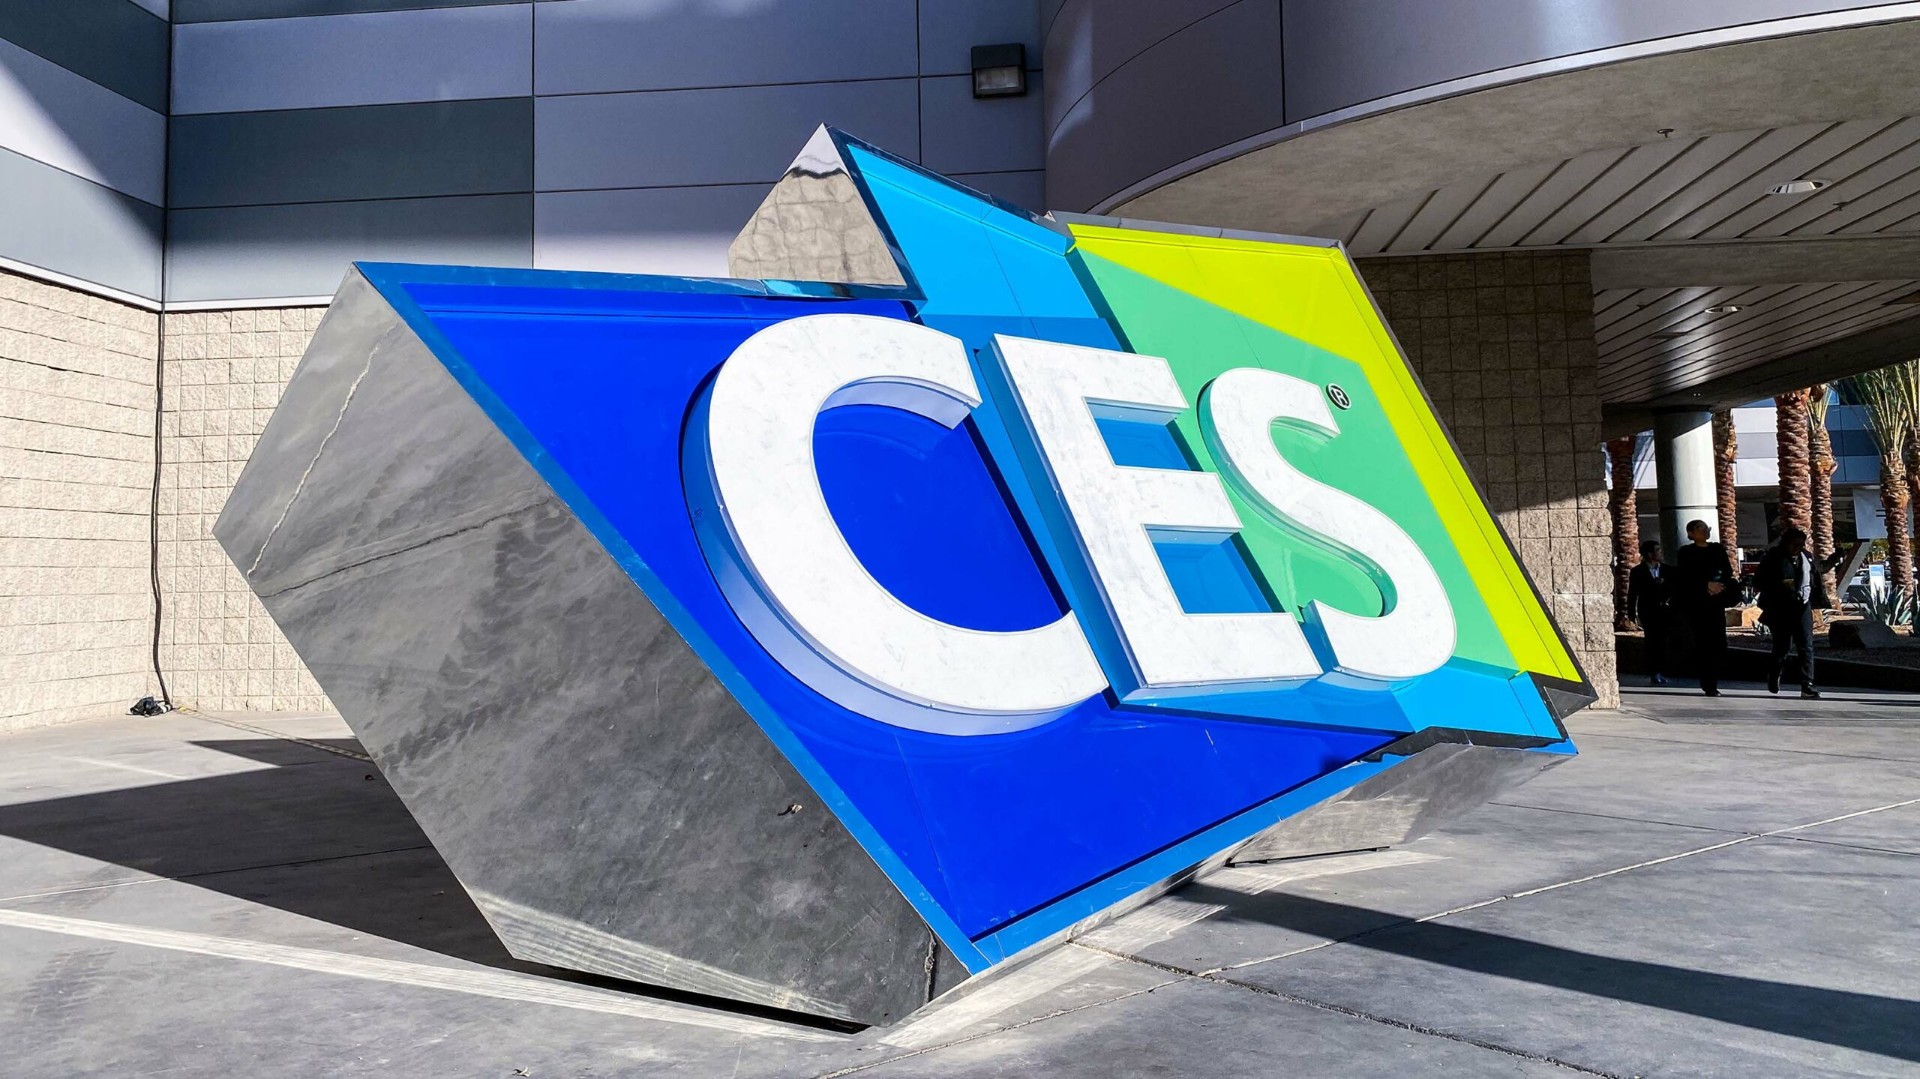 CES Update on Technology solutions for the home